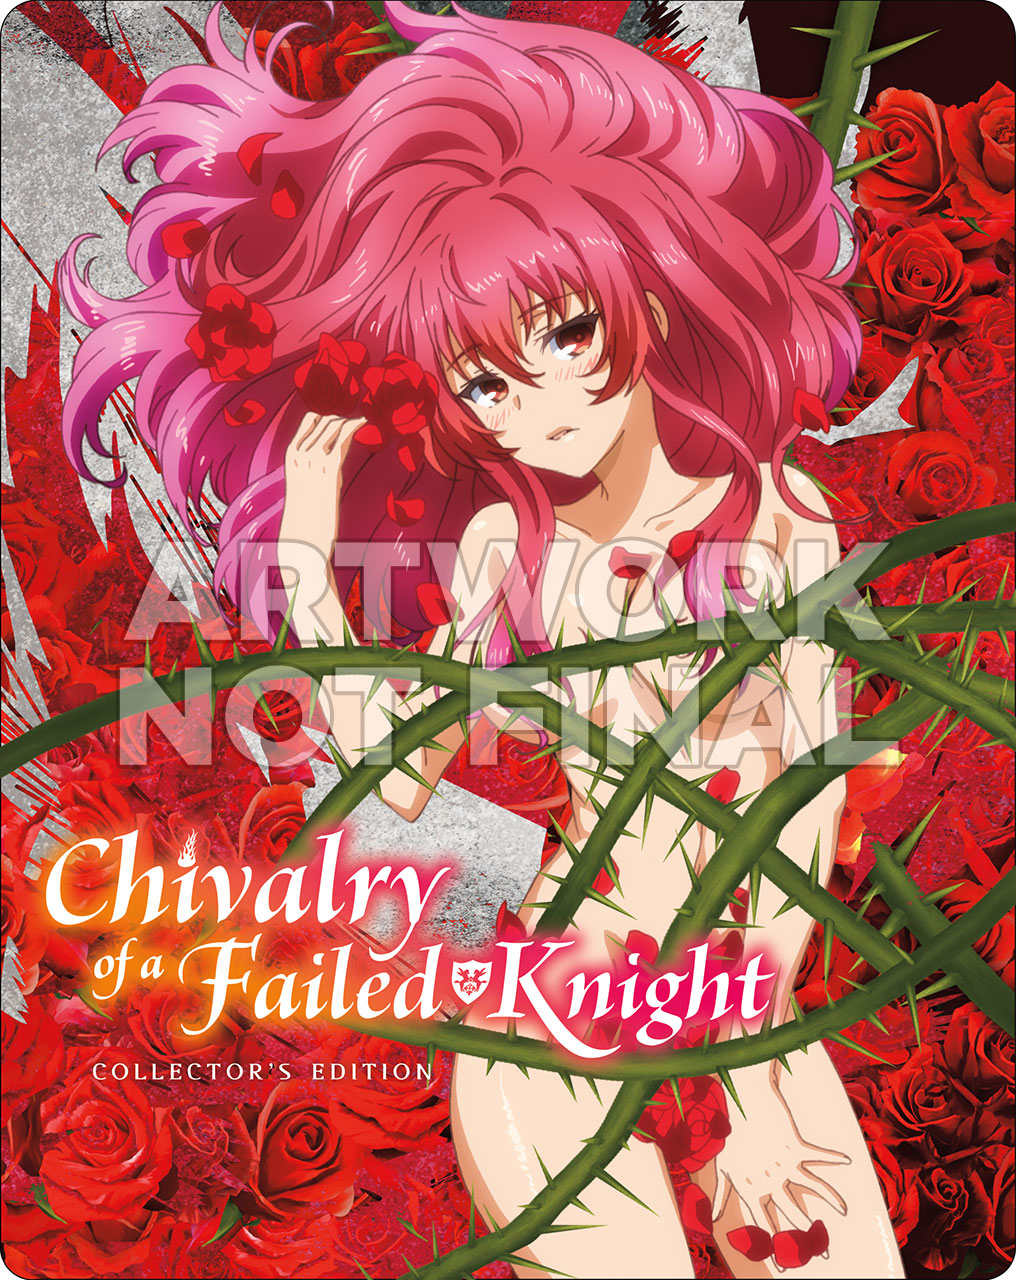 Buy Chivalry of a Failed Knight DVD: Complete Edition - $15.99 at